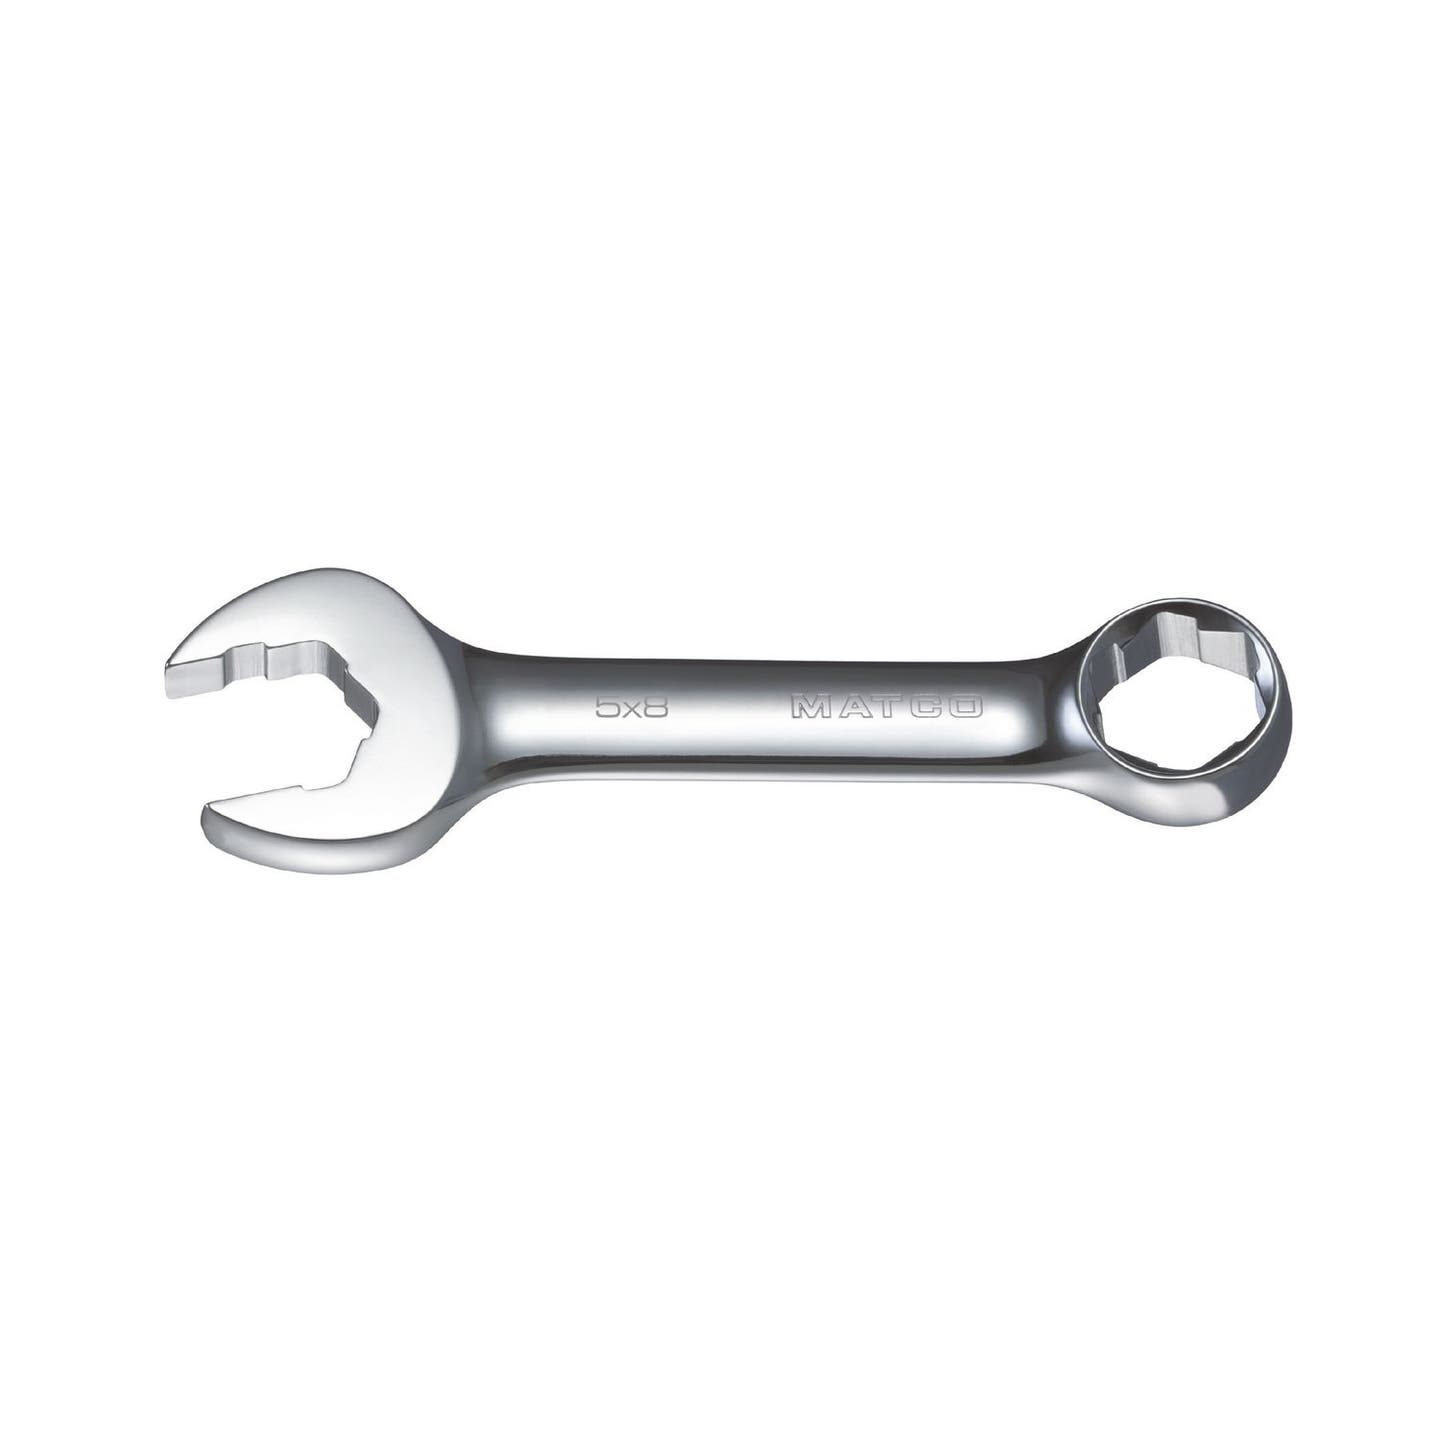 5/8" STUBBY SAE HEX GRIP WRENCH